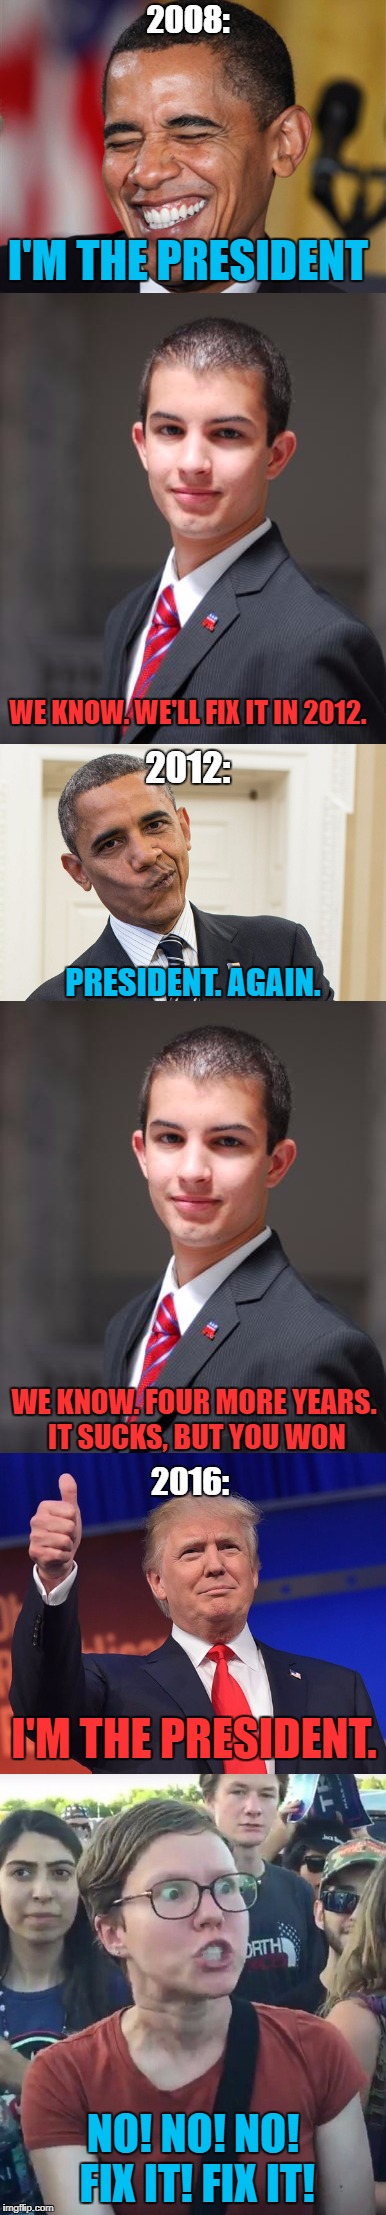 2008: NO! NO! NO! FIX IT! FIX IT! I'M THE PRESIDENT WE KNOW. WE'LL FIX IT IN 2012. 2012: PRESIDENT. AGAIN. WE KNOW. FOUR MORE YEARS. IT SUCK | made w/ Imgflip meme maker